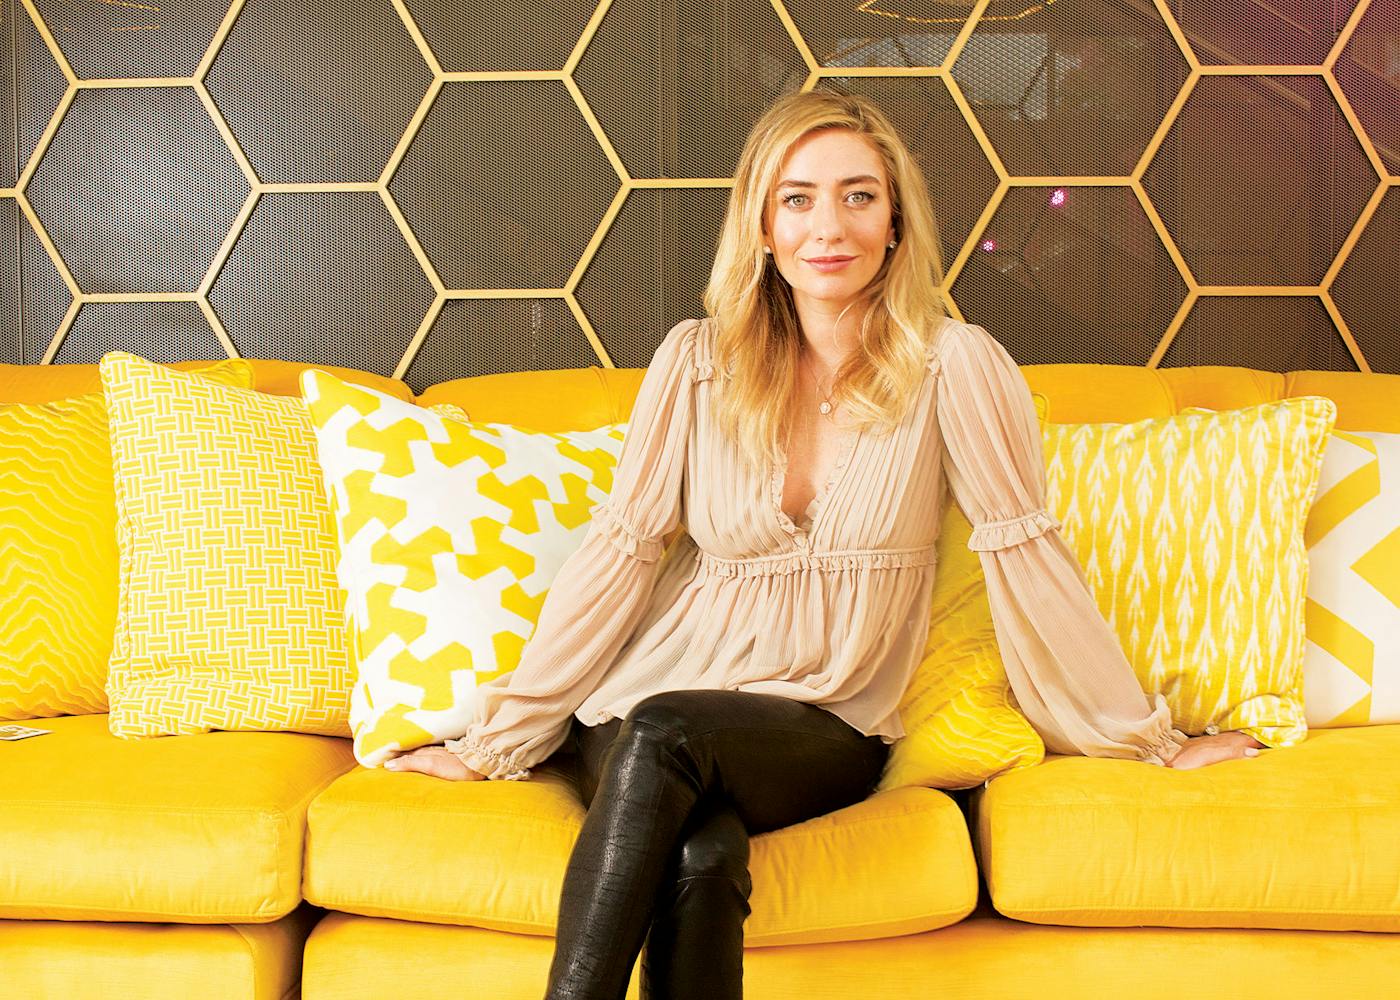 Hot Blonde Teen Fucked - How Whitney Wolfe Herd Changed the Dating Game â€“ Texas Monthly